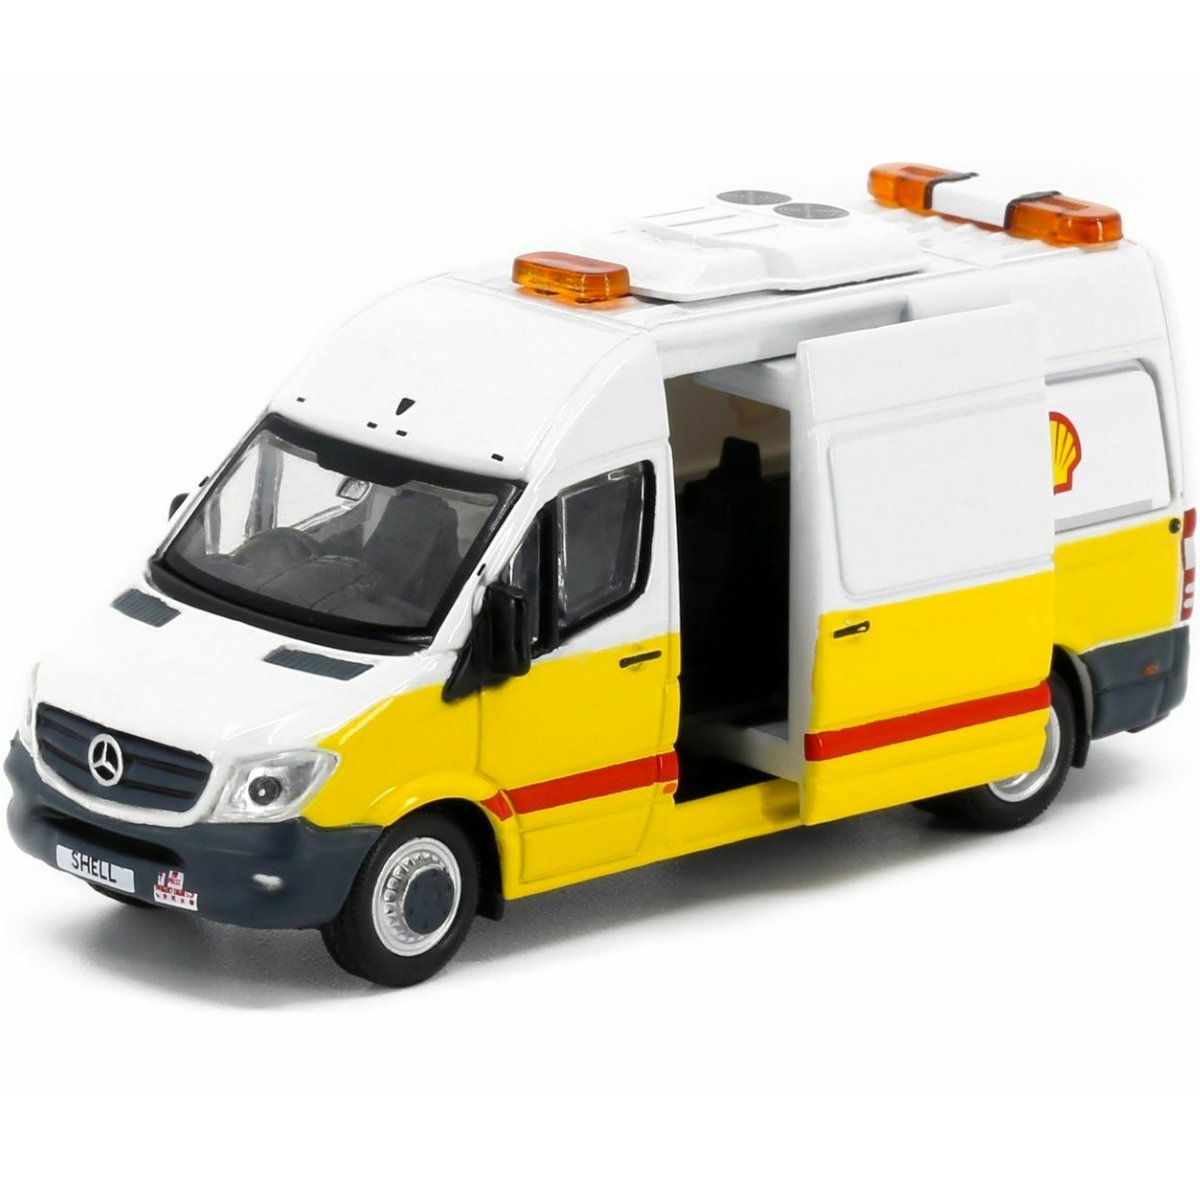 Tiny Models Mercedes-Benz Sprinter Shell (1:76 Scale) - Phillips Hobbies